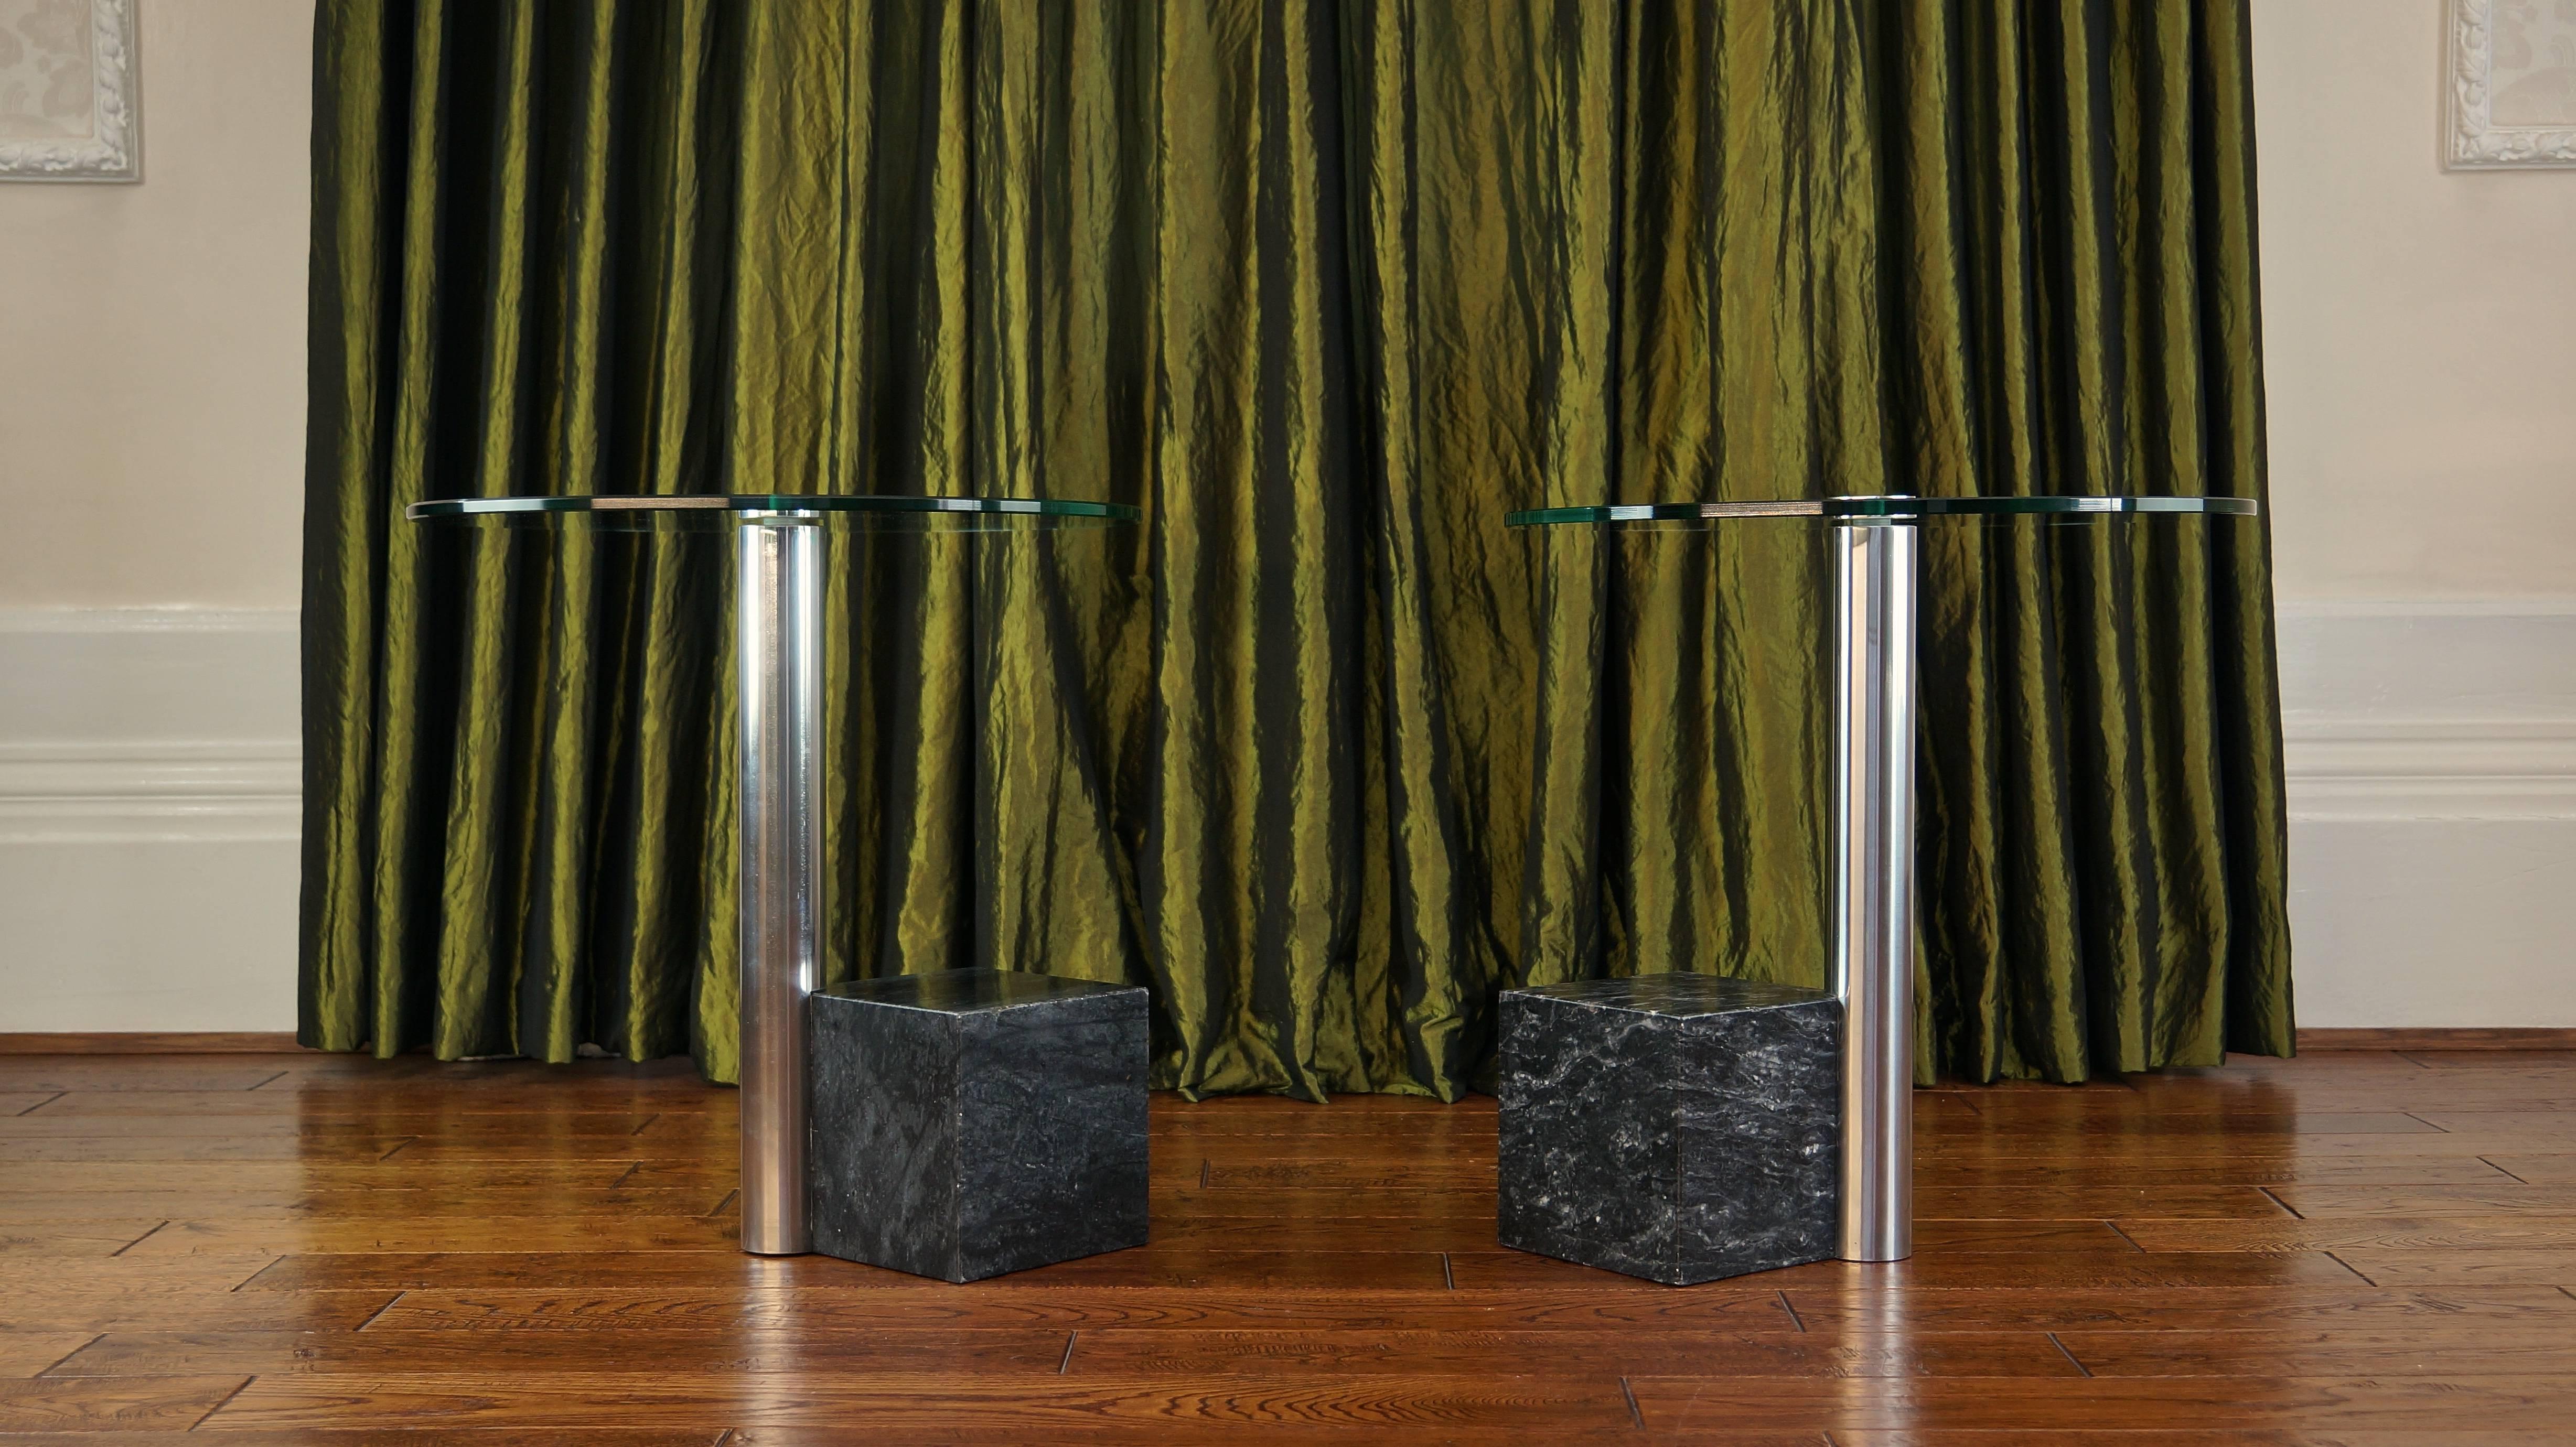 Dutch Pair of Vintage Marble and Glass HK2 Side Tables by Hank Kwint, Metaform 1980s